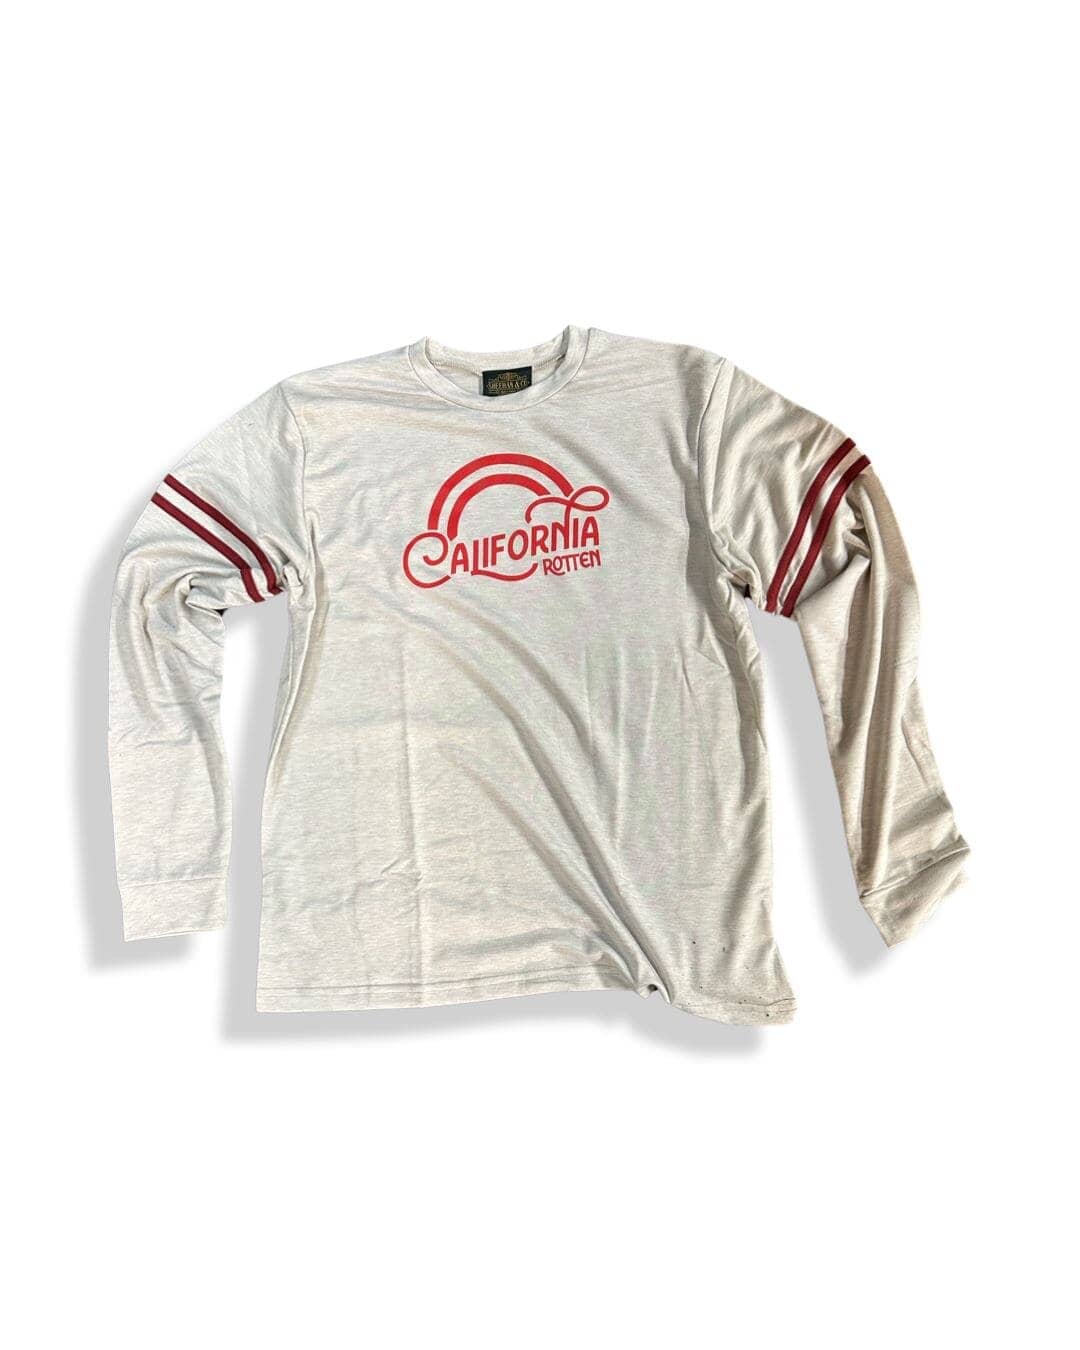 California Rotten Long Sleeve French Terry - Sheehan and Co.